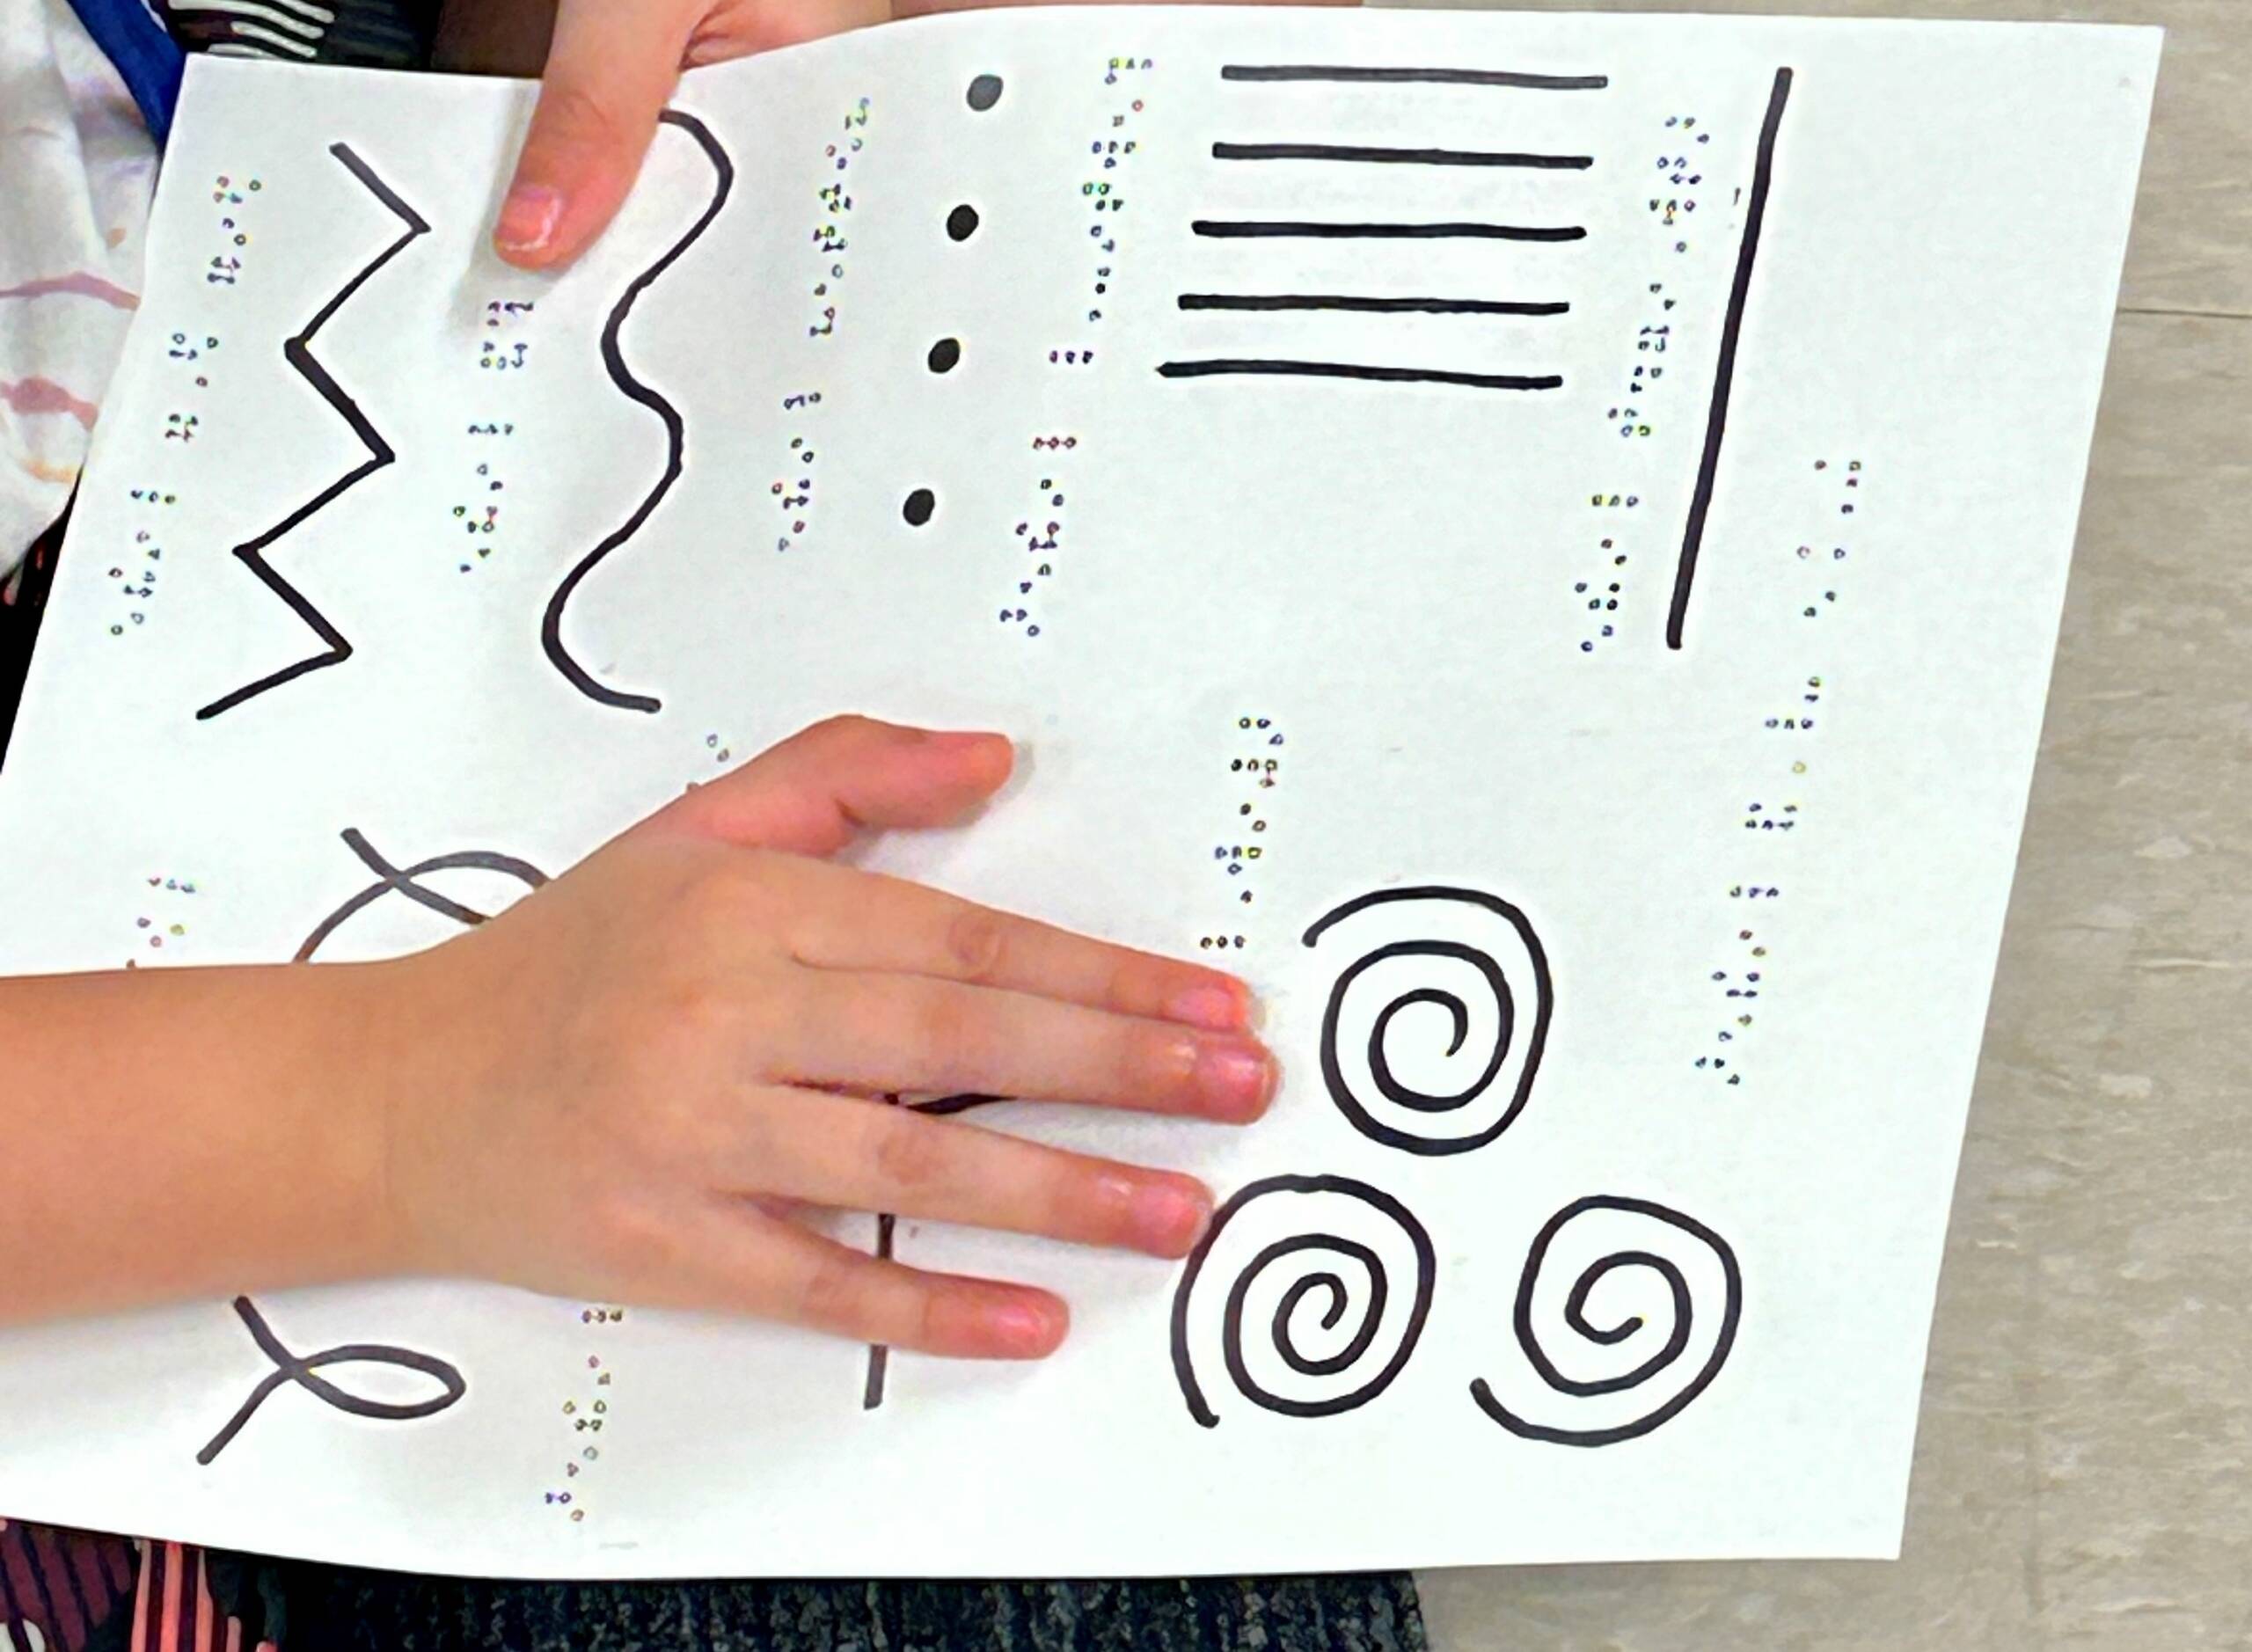 A student holding a piece of paper with a variety of line types such as vertical lines, spirals, a dotted line, and a set of intersecting lines.